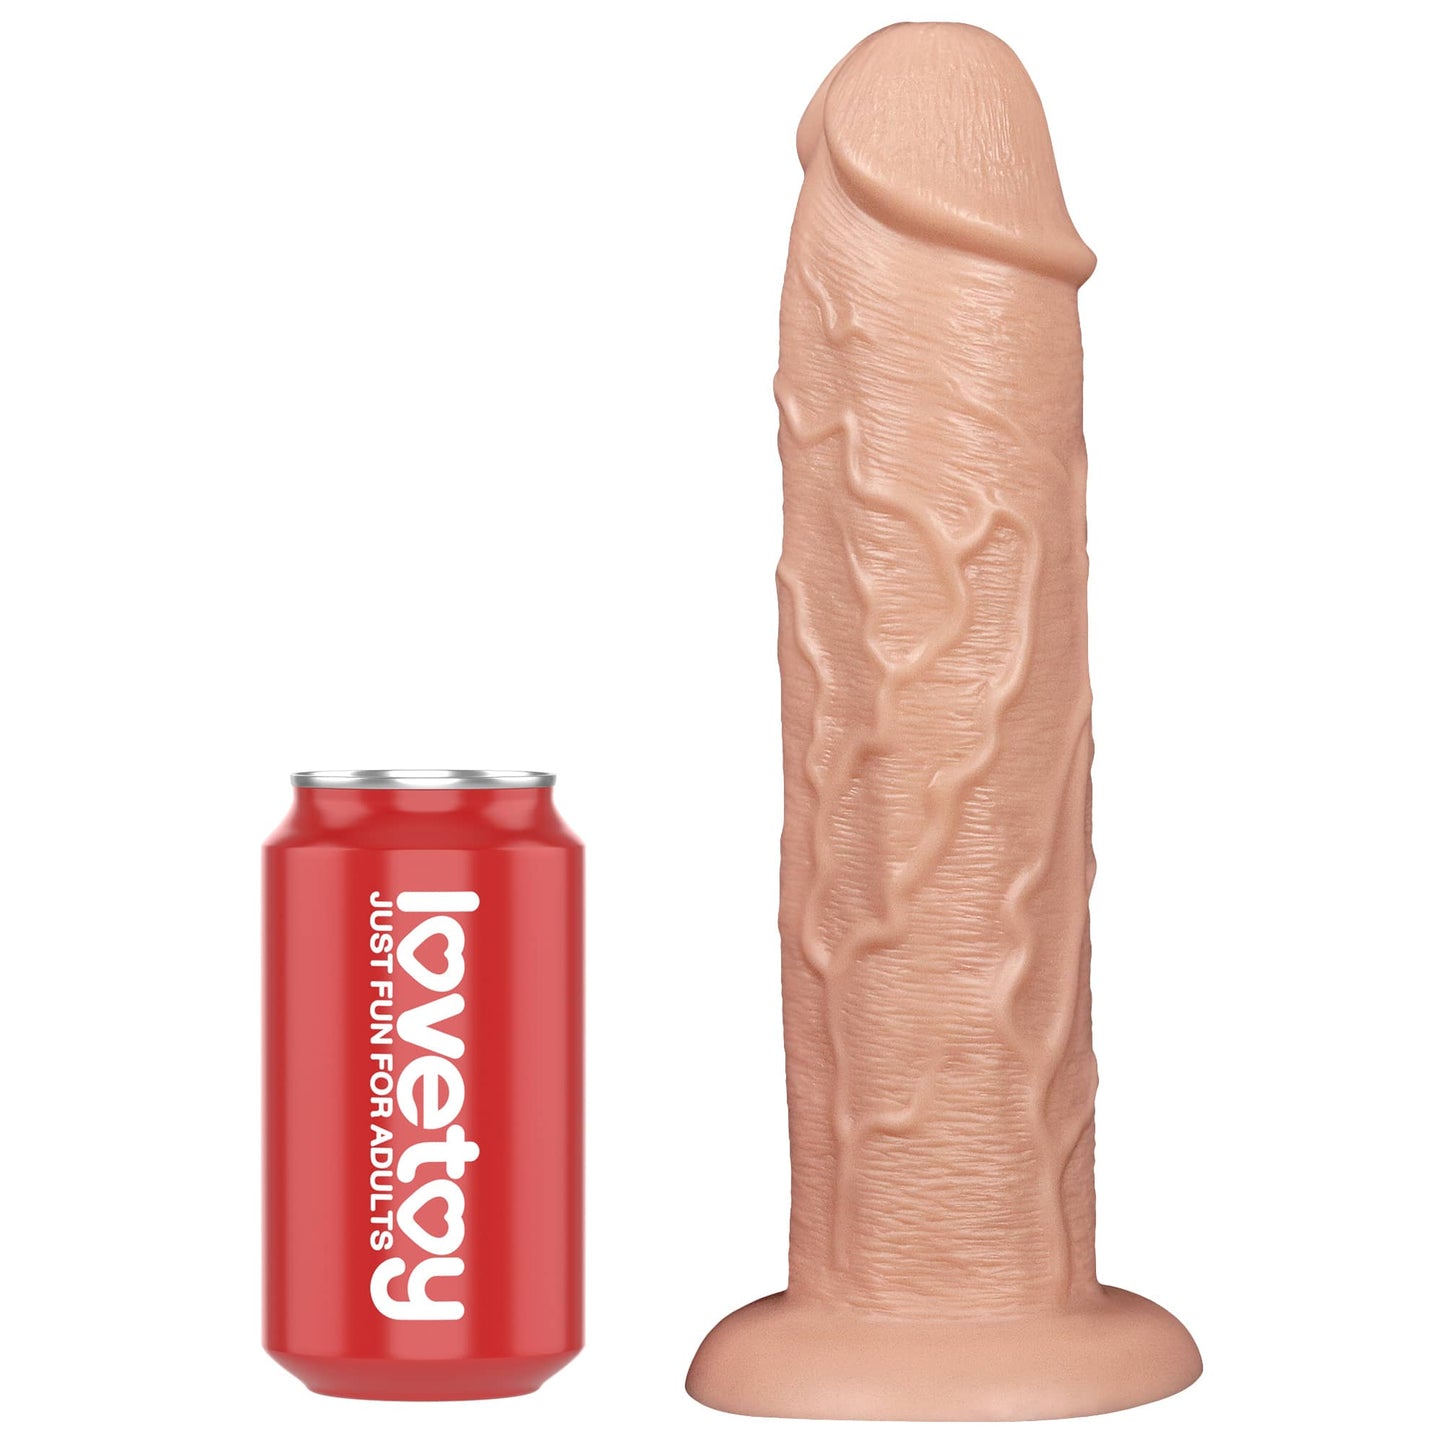 Comparison between the 11 inches vibrating realistic long dildo and beverage cans 